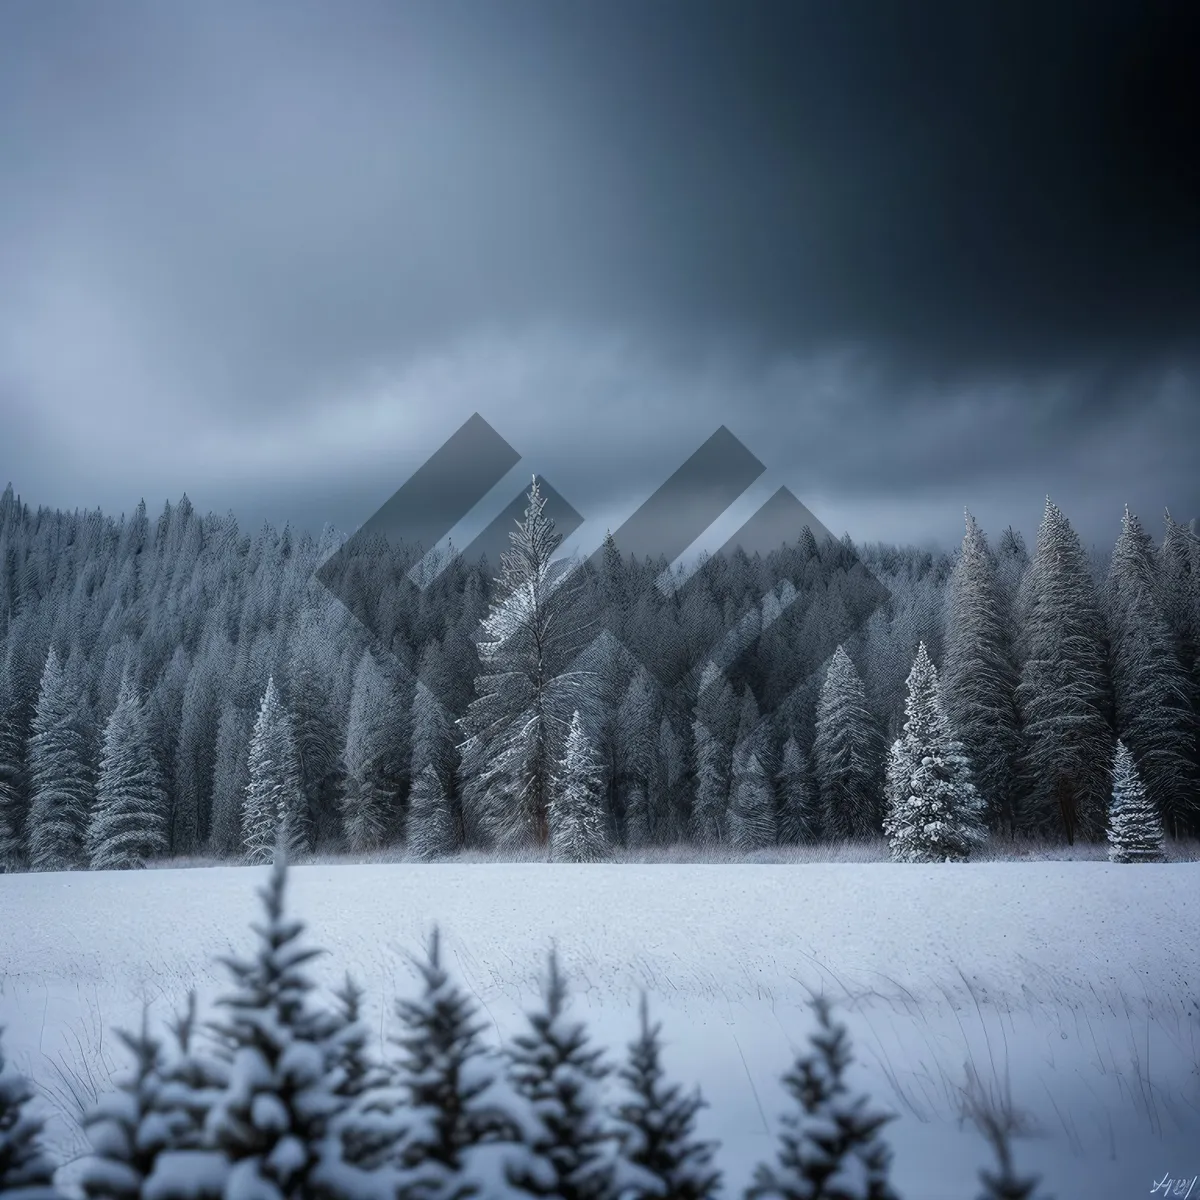 Picture of Snowy Winter Landscape with Majestic Mountains and Evergreen Forest